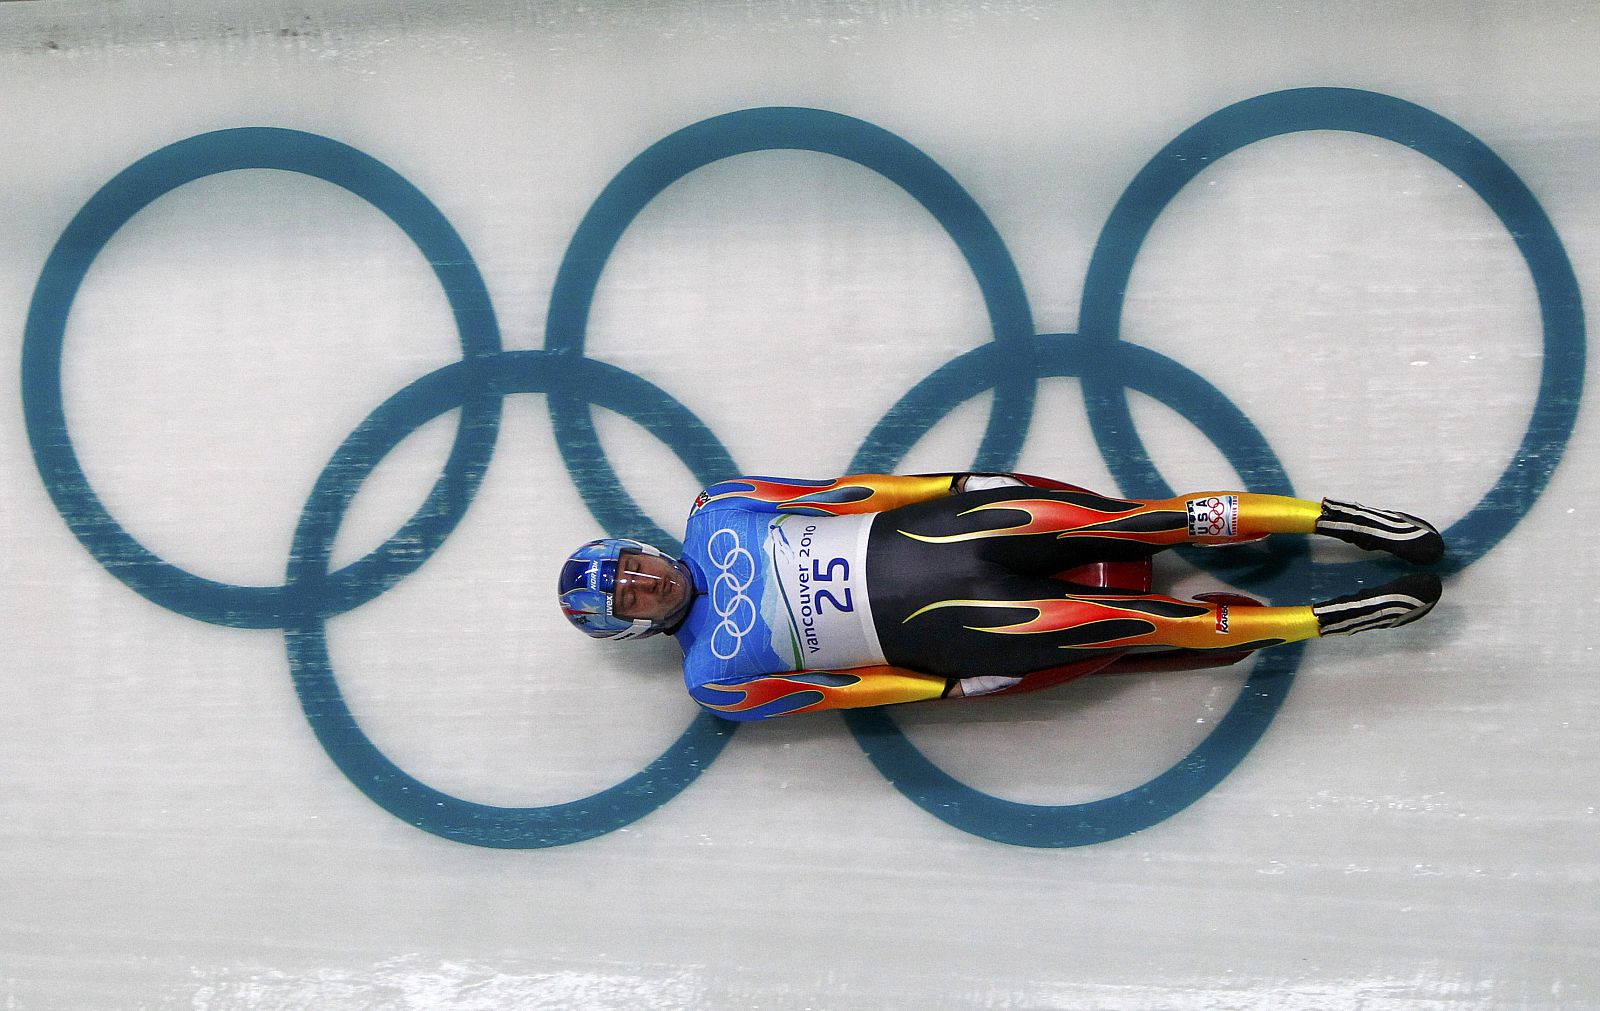 Benshoof of the U.S. speeds down the track during a training run for the men's singles luge in preparation for the Vancouver 2010 Winter Olympics in Whistler